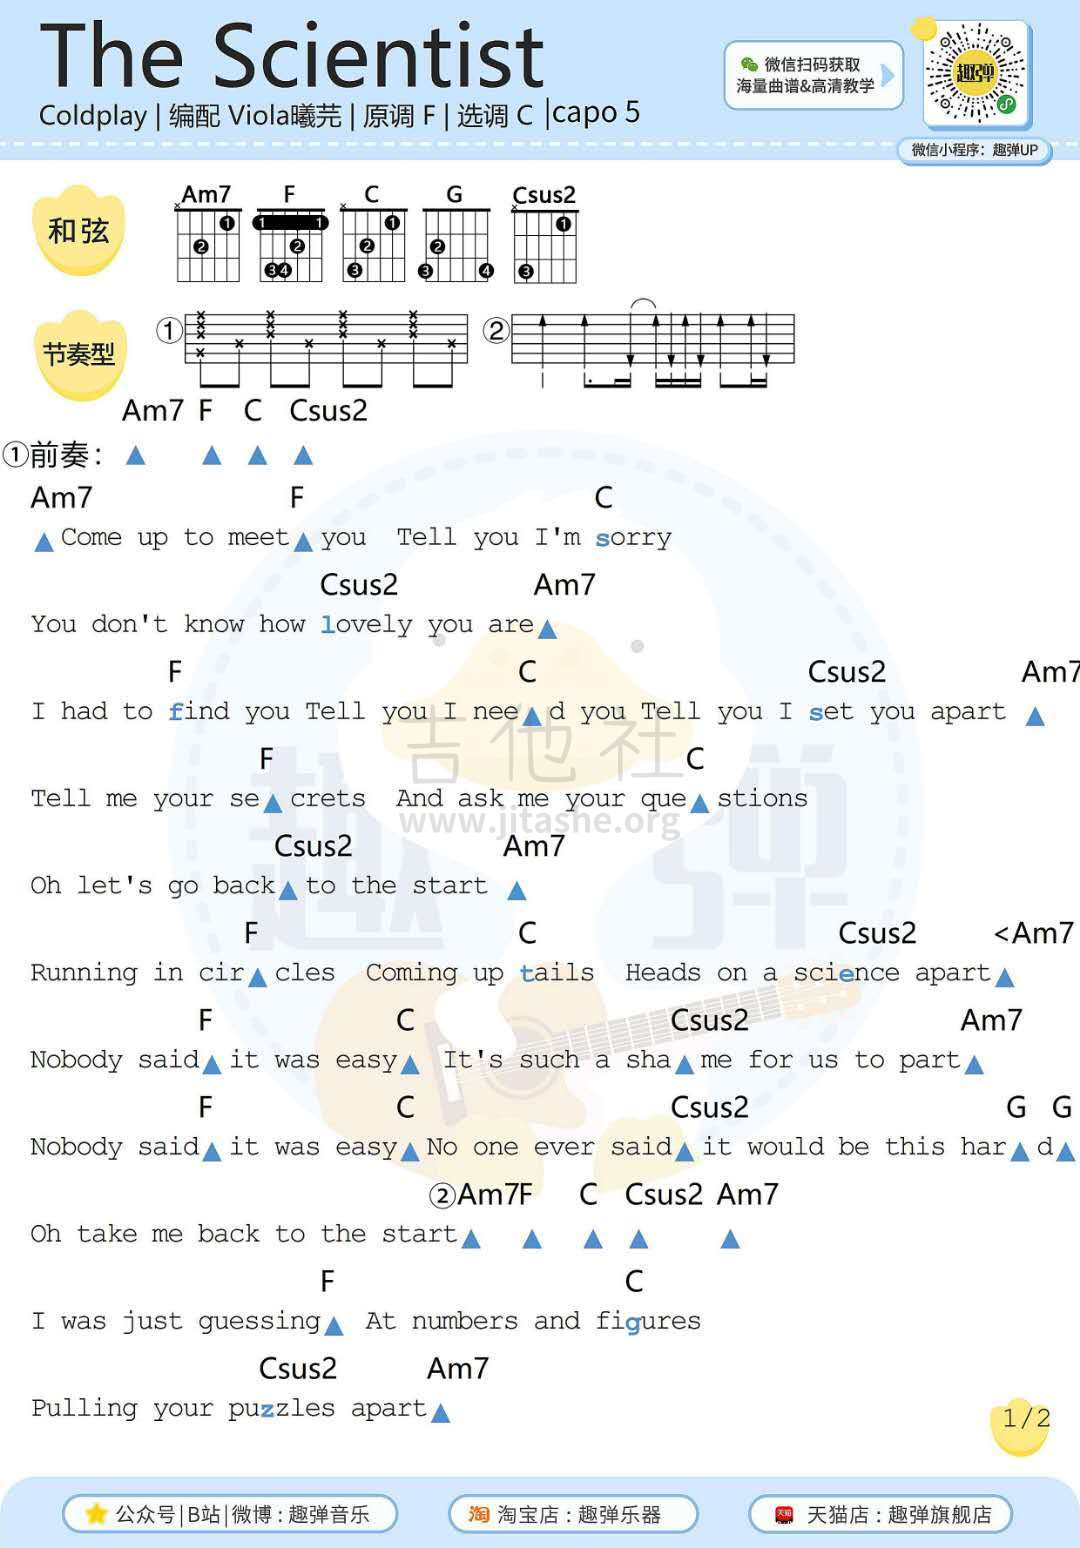 Coldplay-The Scientist Sheet Music pdf, - Free Score Download ★